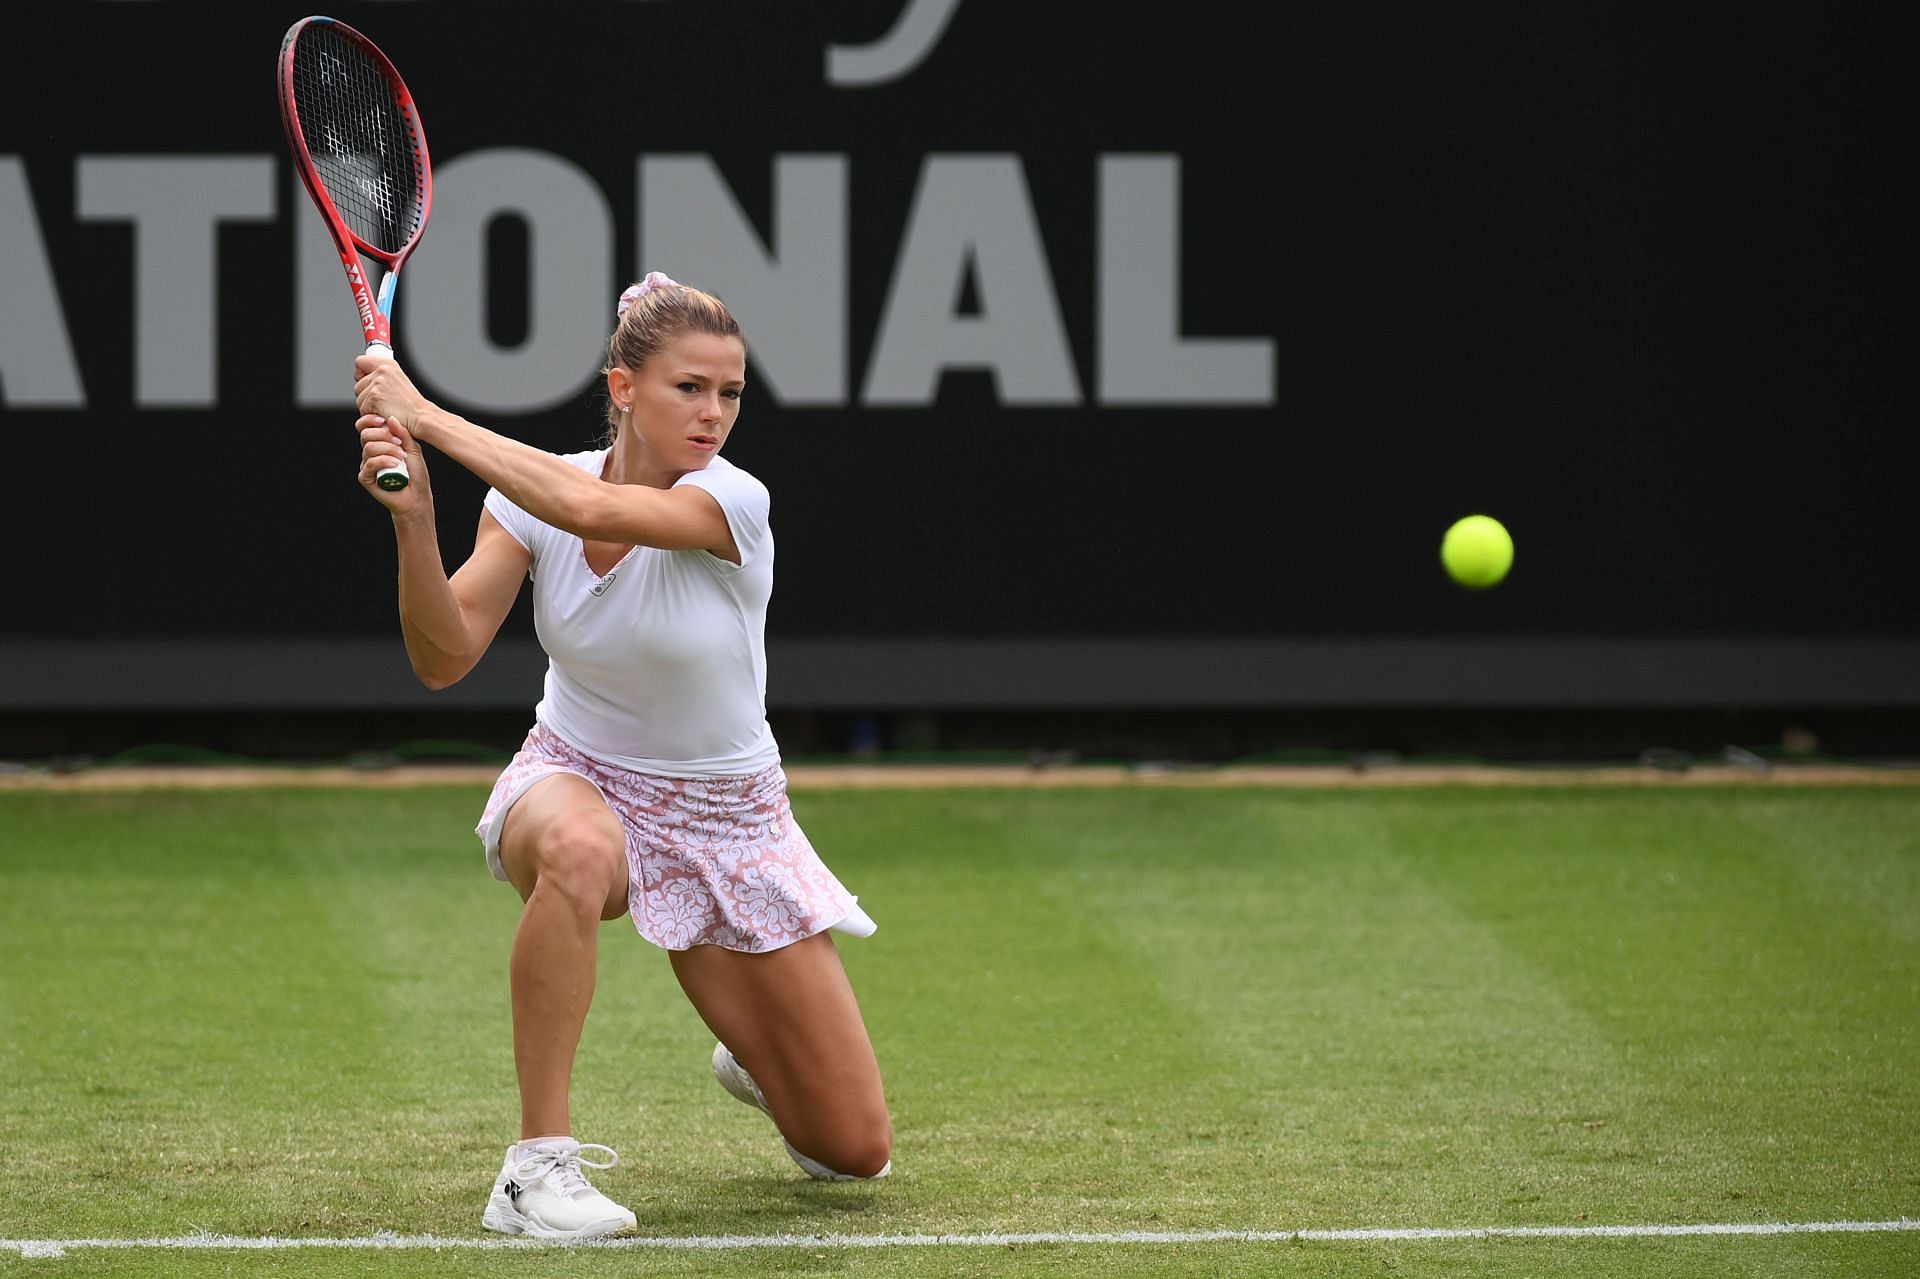  Giorgi will be eyeing a second straight Eastbourne semifinal.